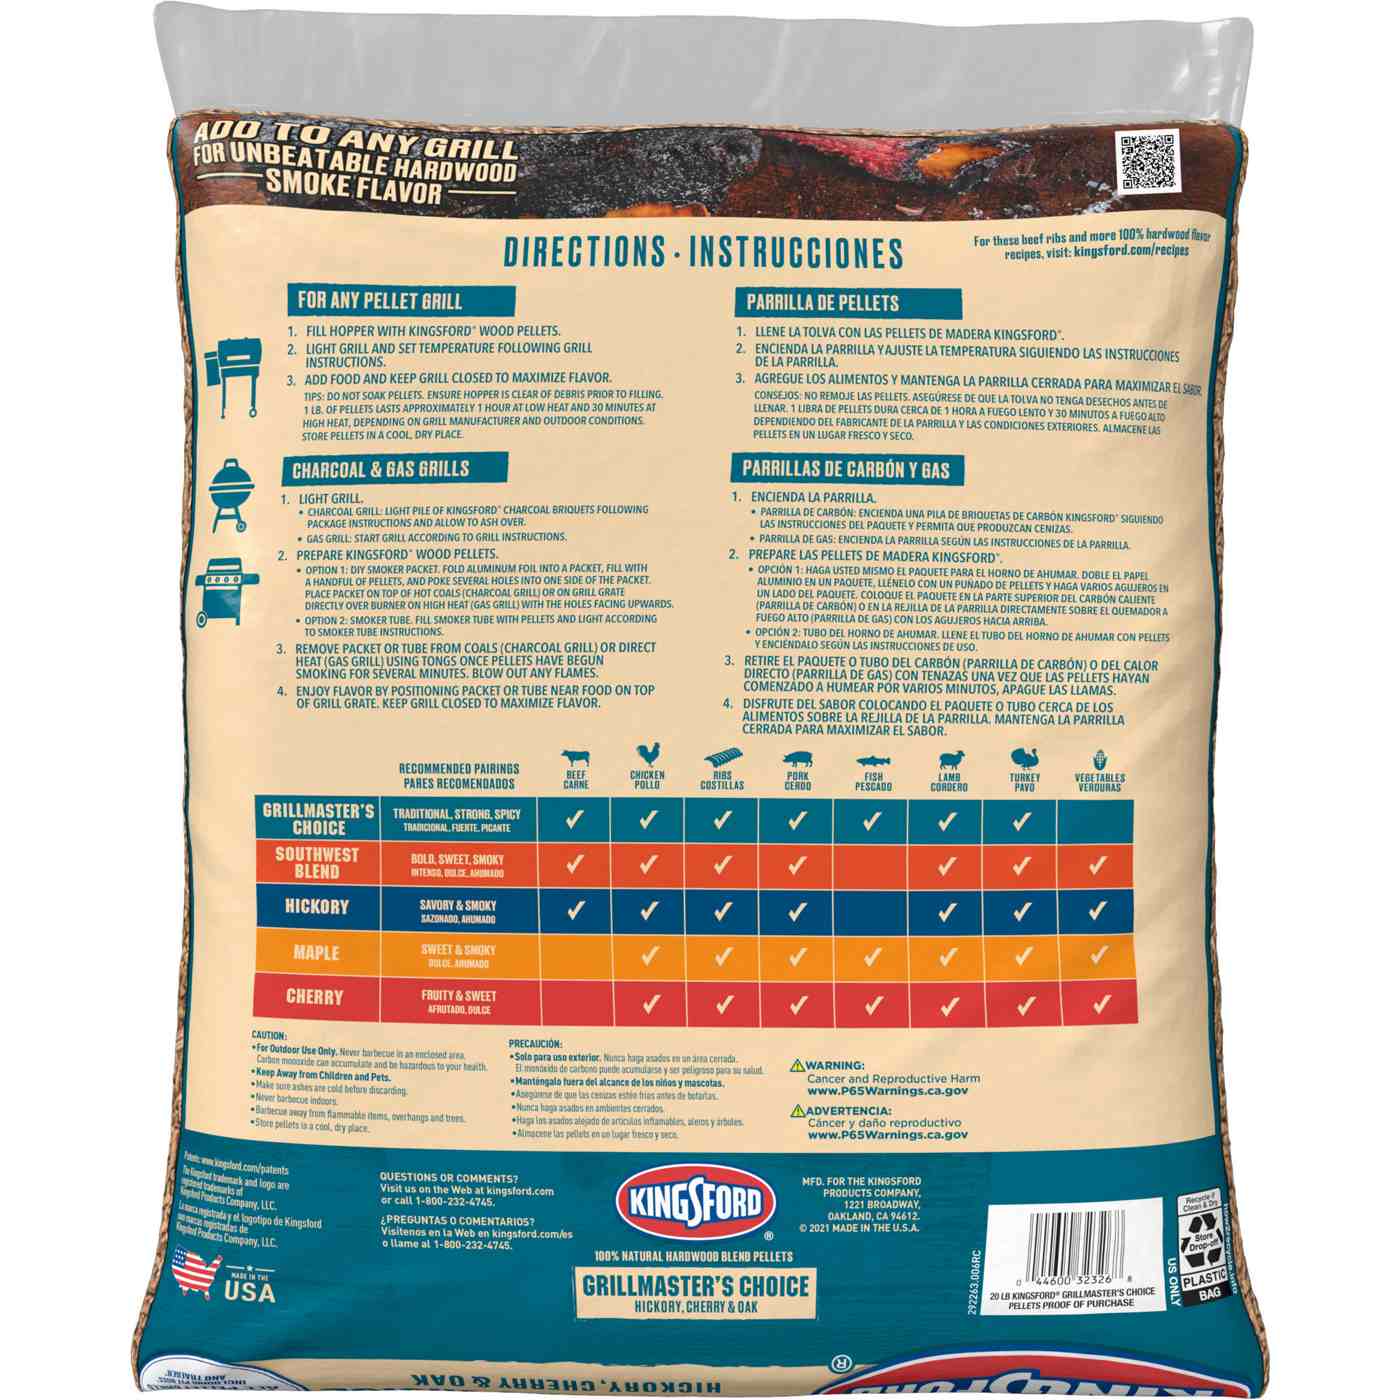 Kingsford 100% Natural Hardwood Blend Pellets, Grillmaster's Choice, Hickory, Cherry and Oak; image 5 of 5